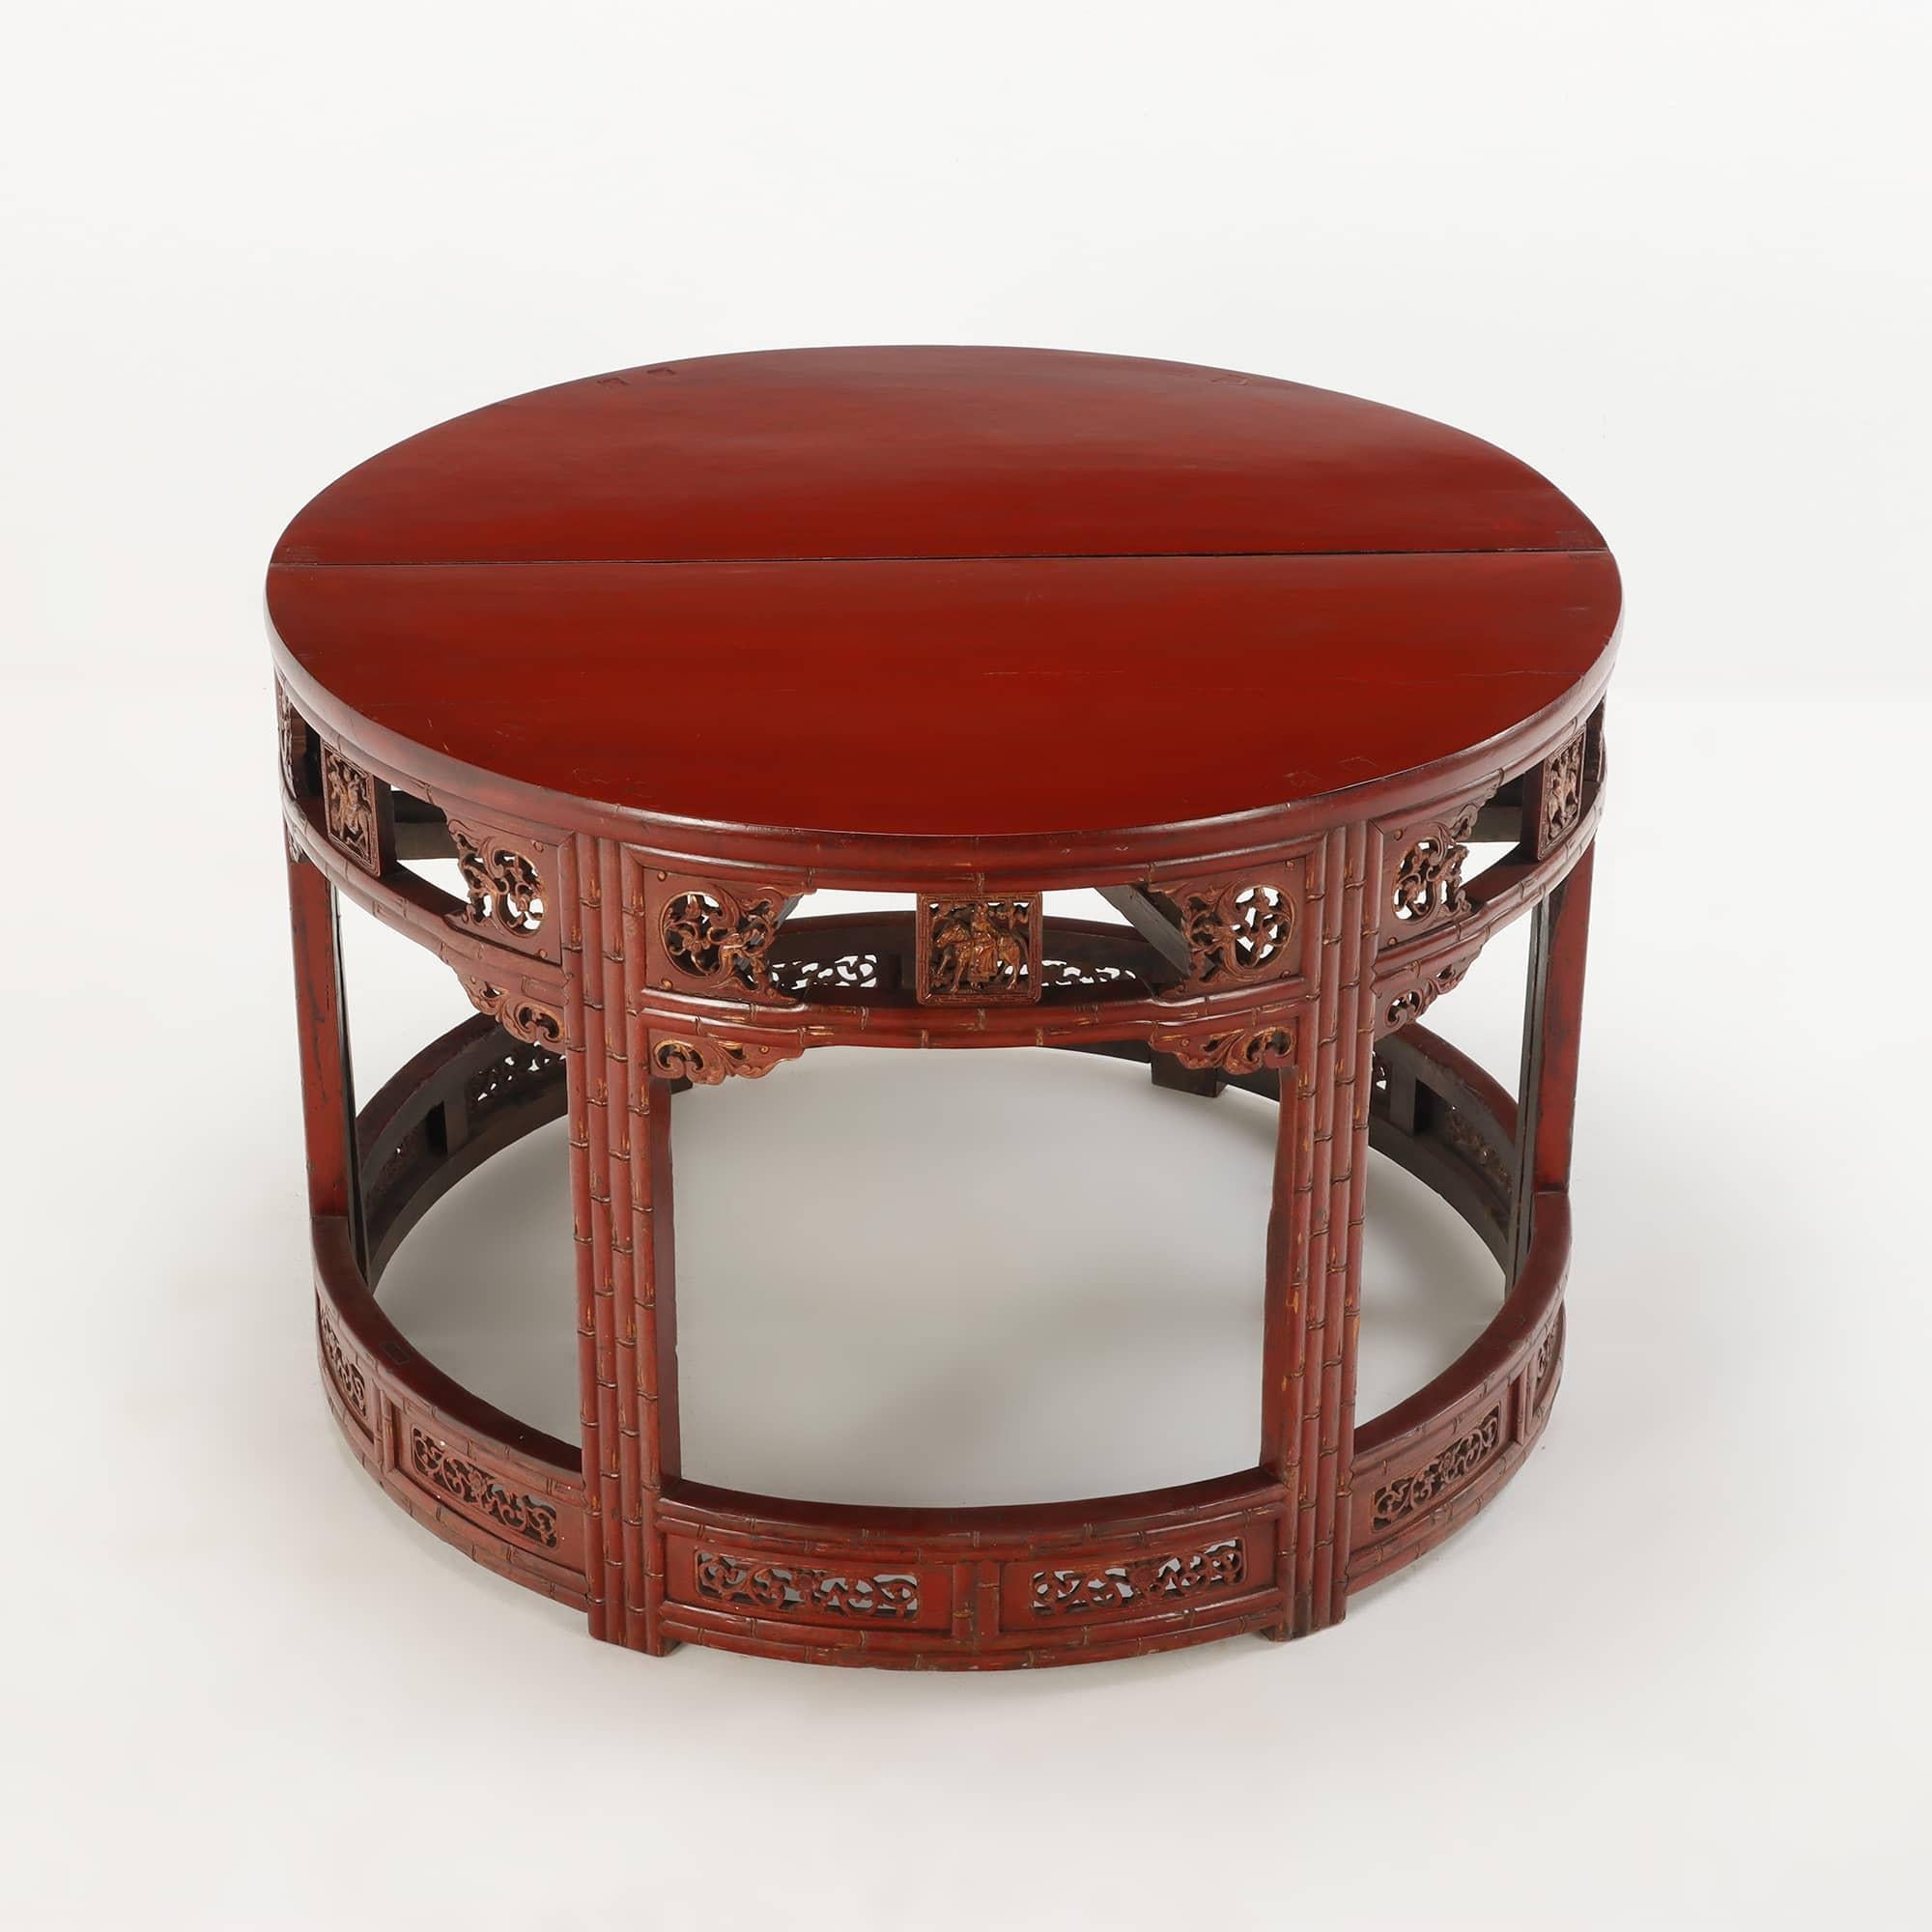 Carved demi-lune Chinese console tables in red C 1880. Can be pushed together to make a center table.
Center table measuring: 32.5